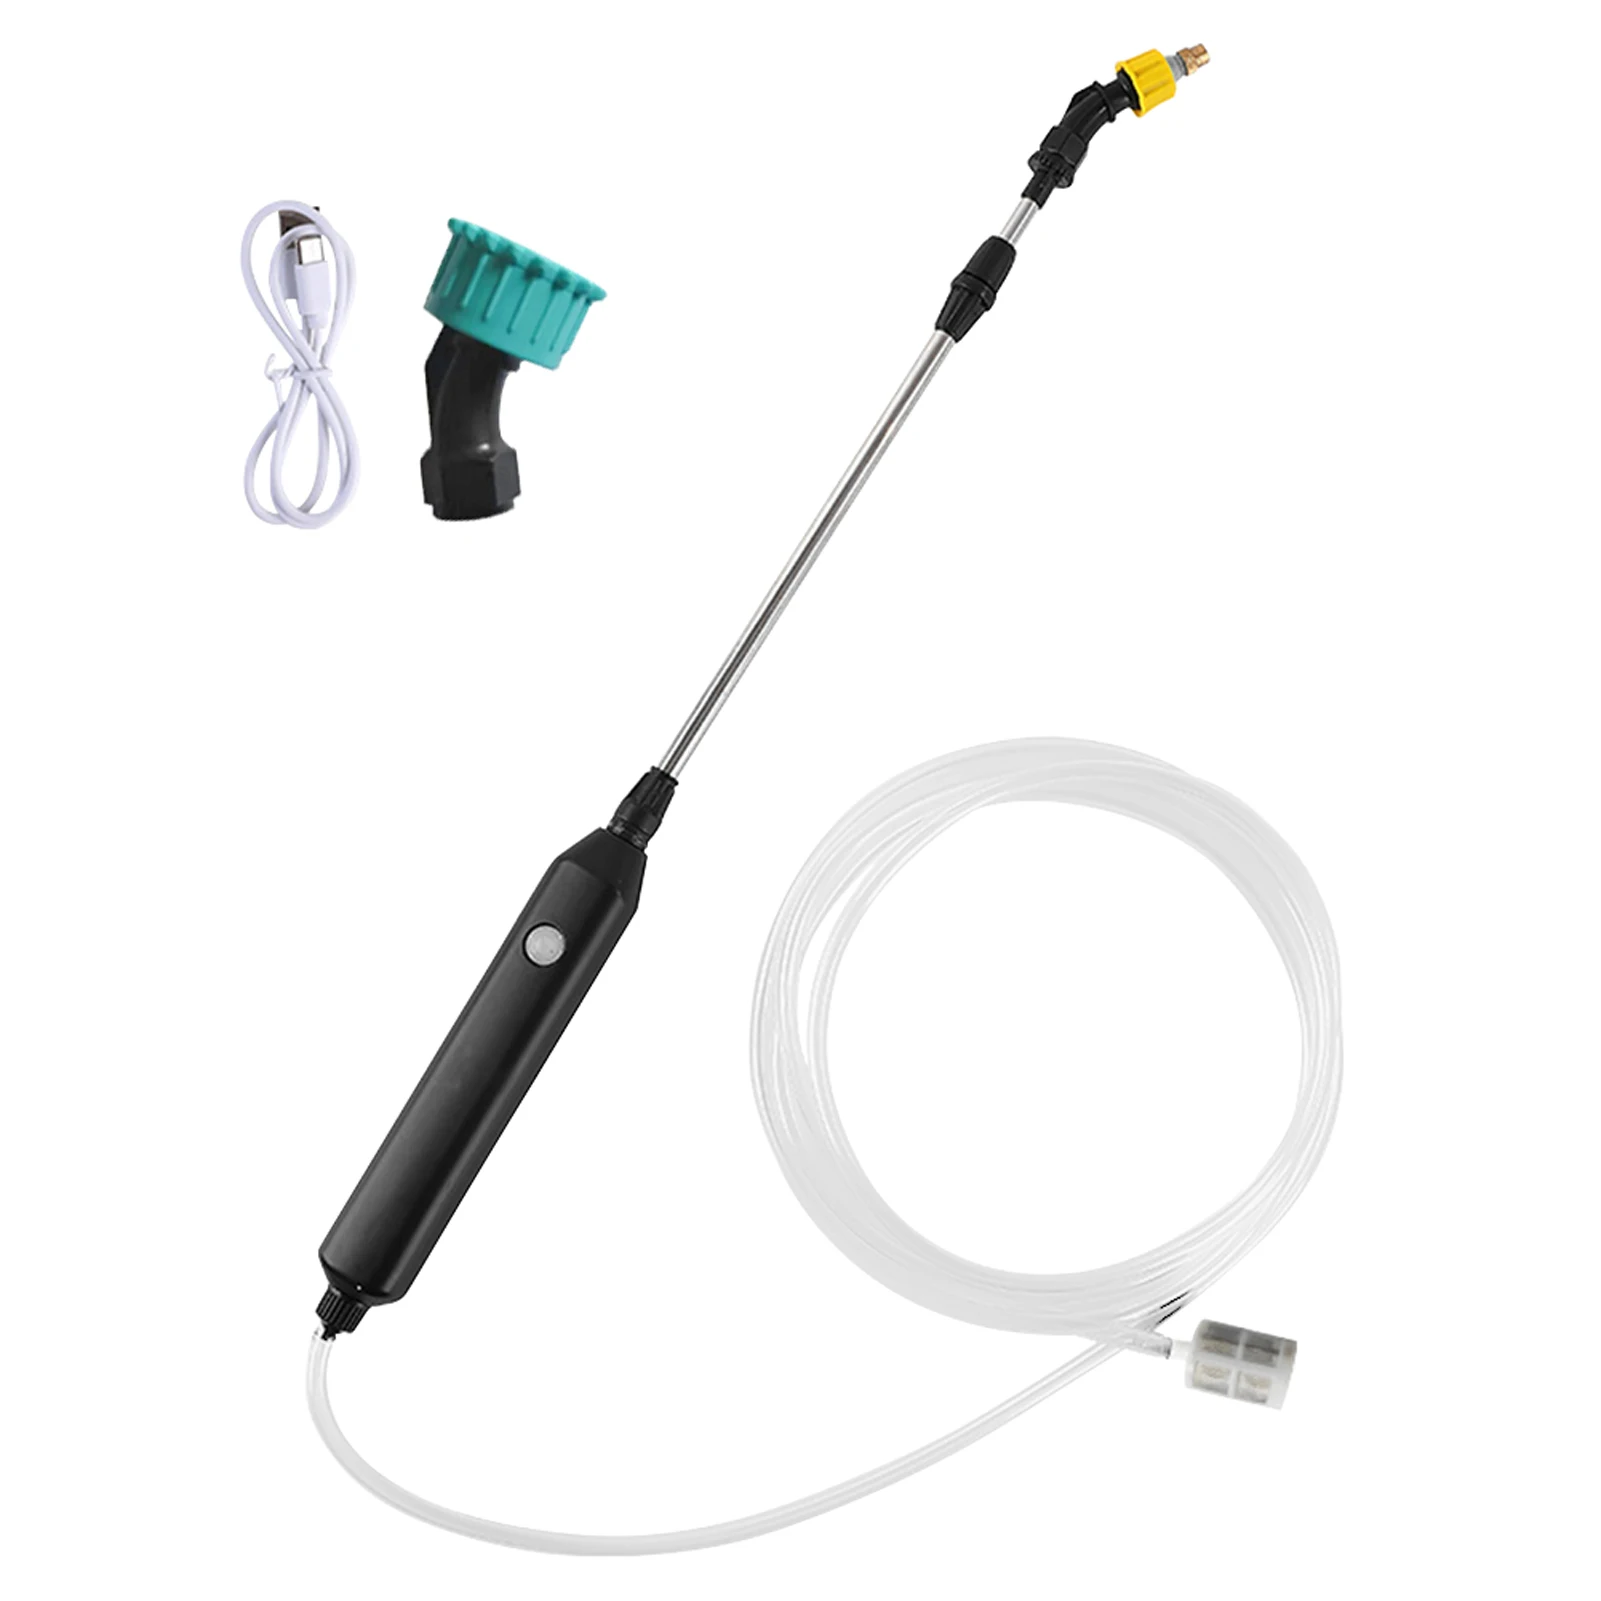 

With Nozzles Yard Detachable Weeds Agriculture 3M 5M Hose Lawn Electric Sprayer Plant Garden Watering Labor Saving Multi Purpose